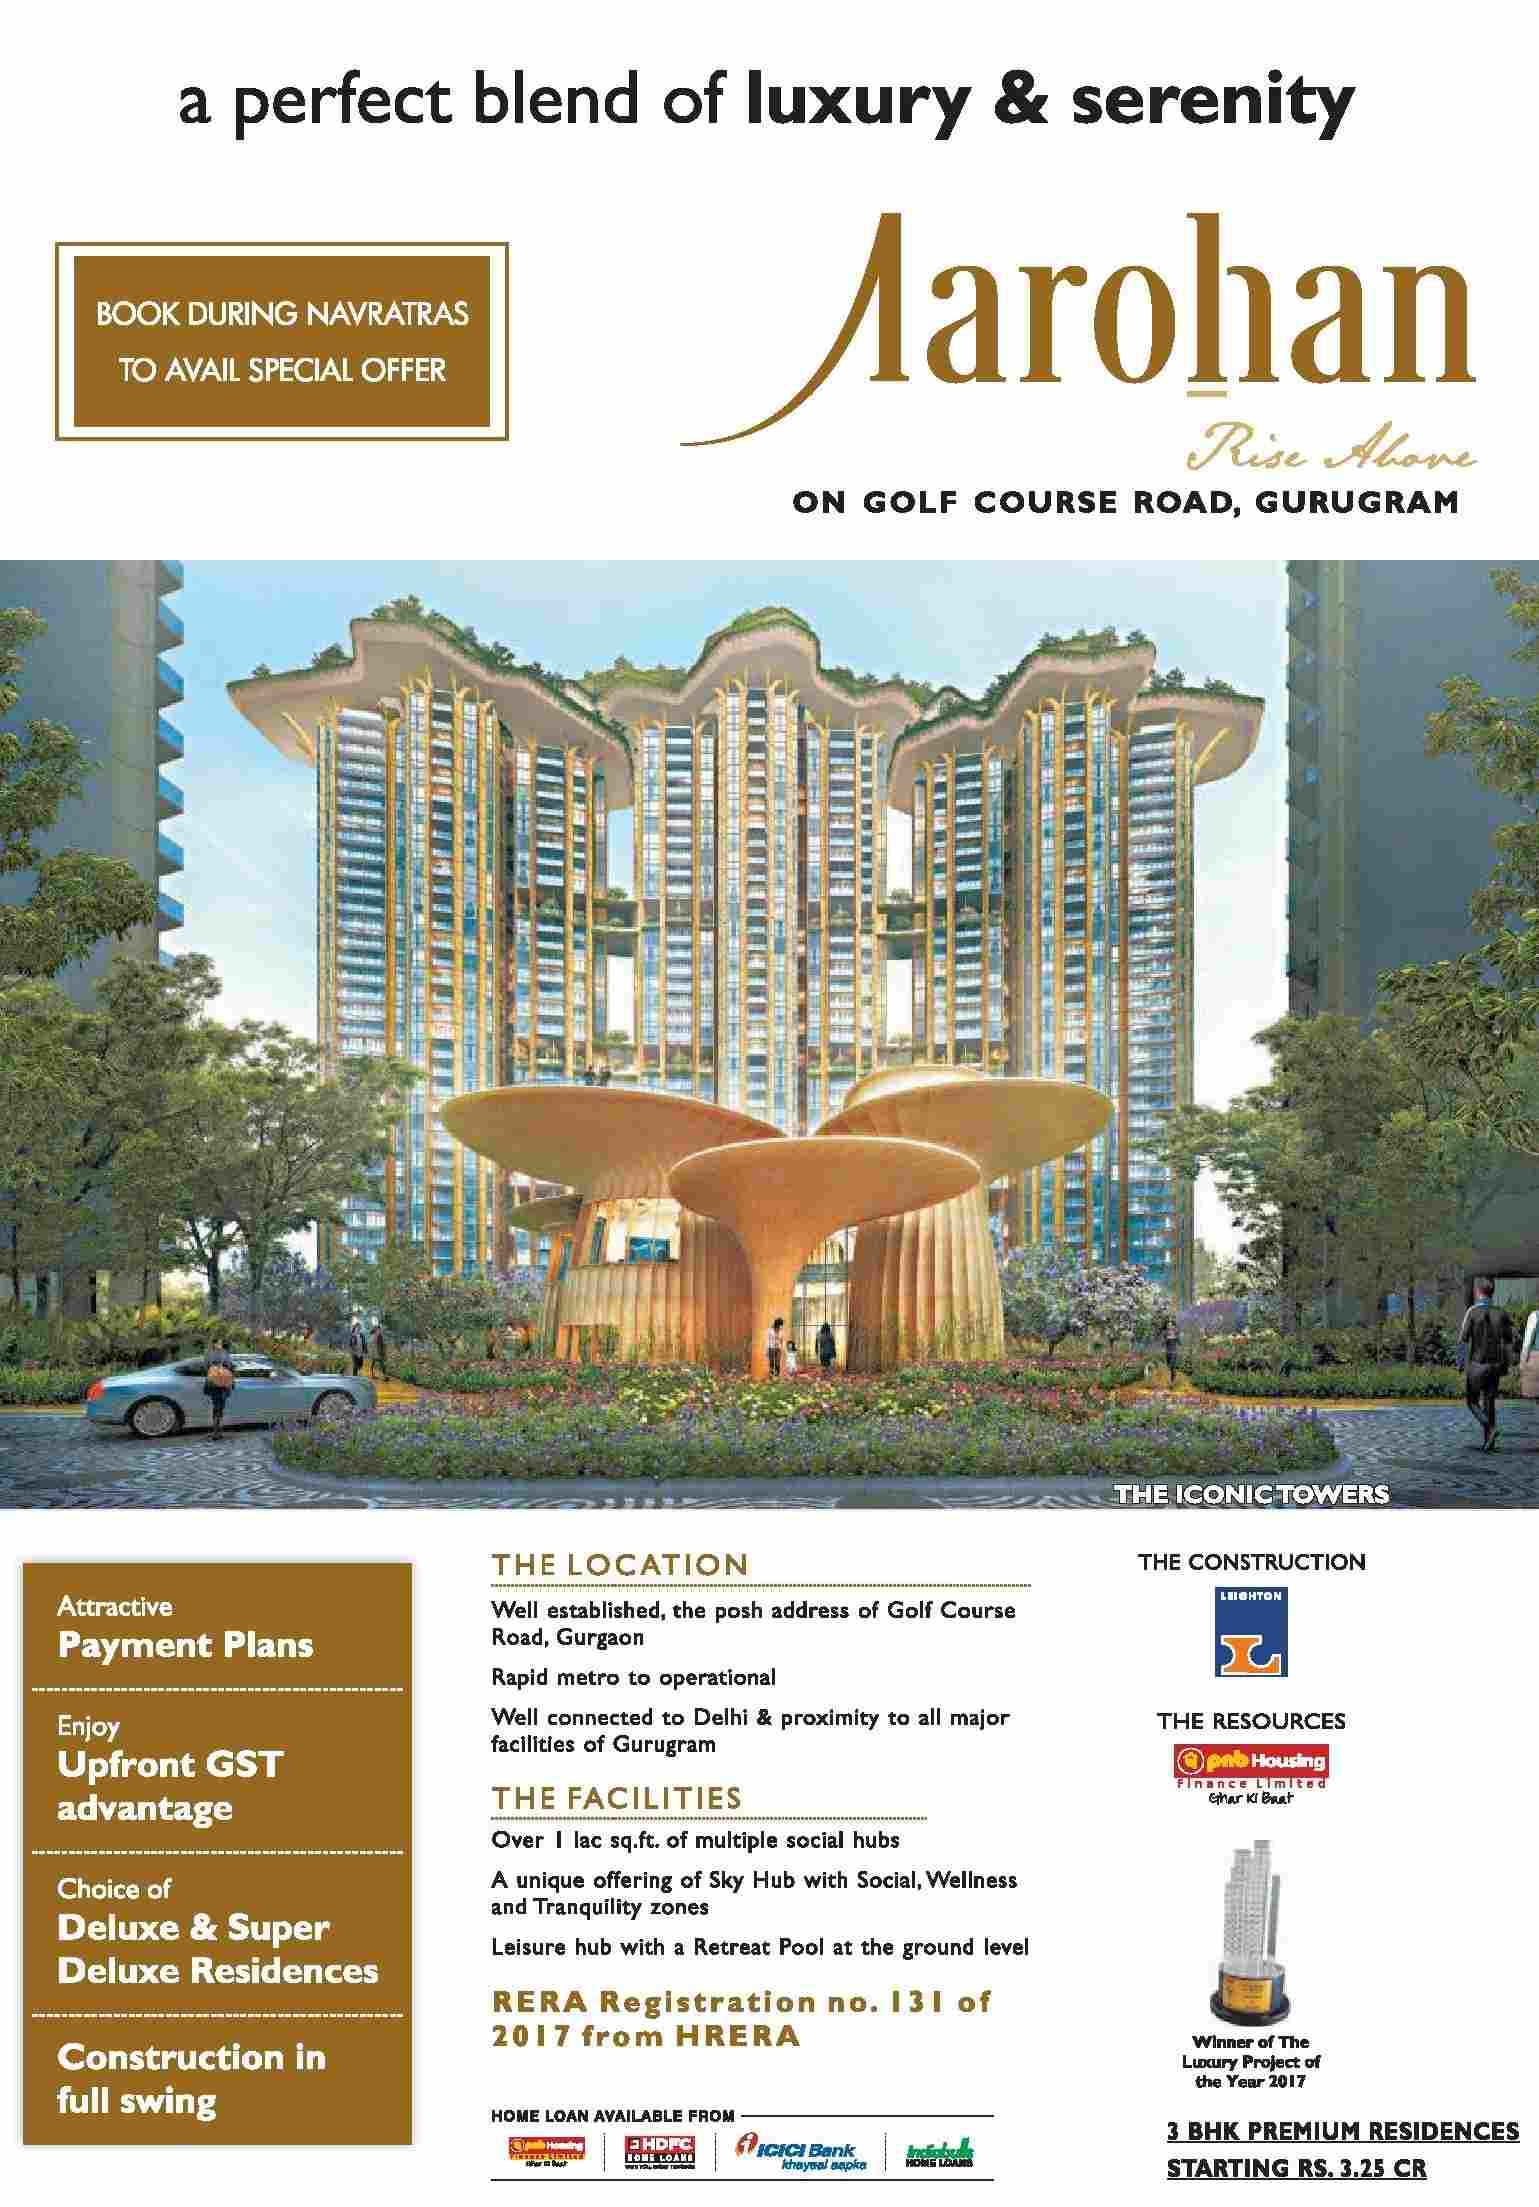 Enjoy the perfect blend of luxury & serenity at Vipul Aarohan on Golf Course Road, Gurgaon Update